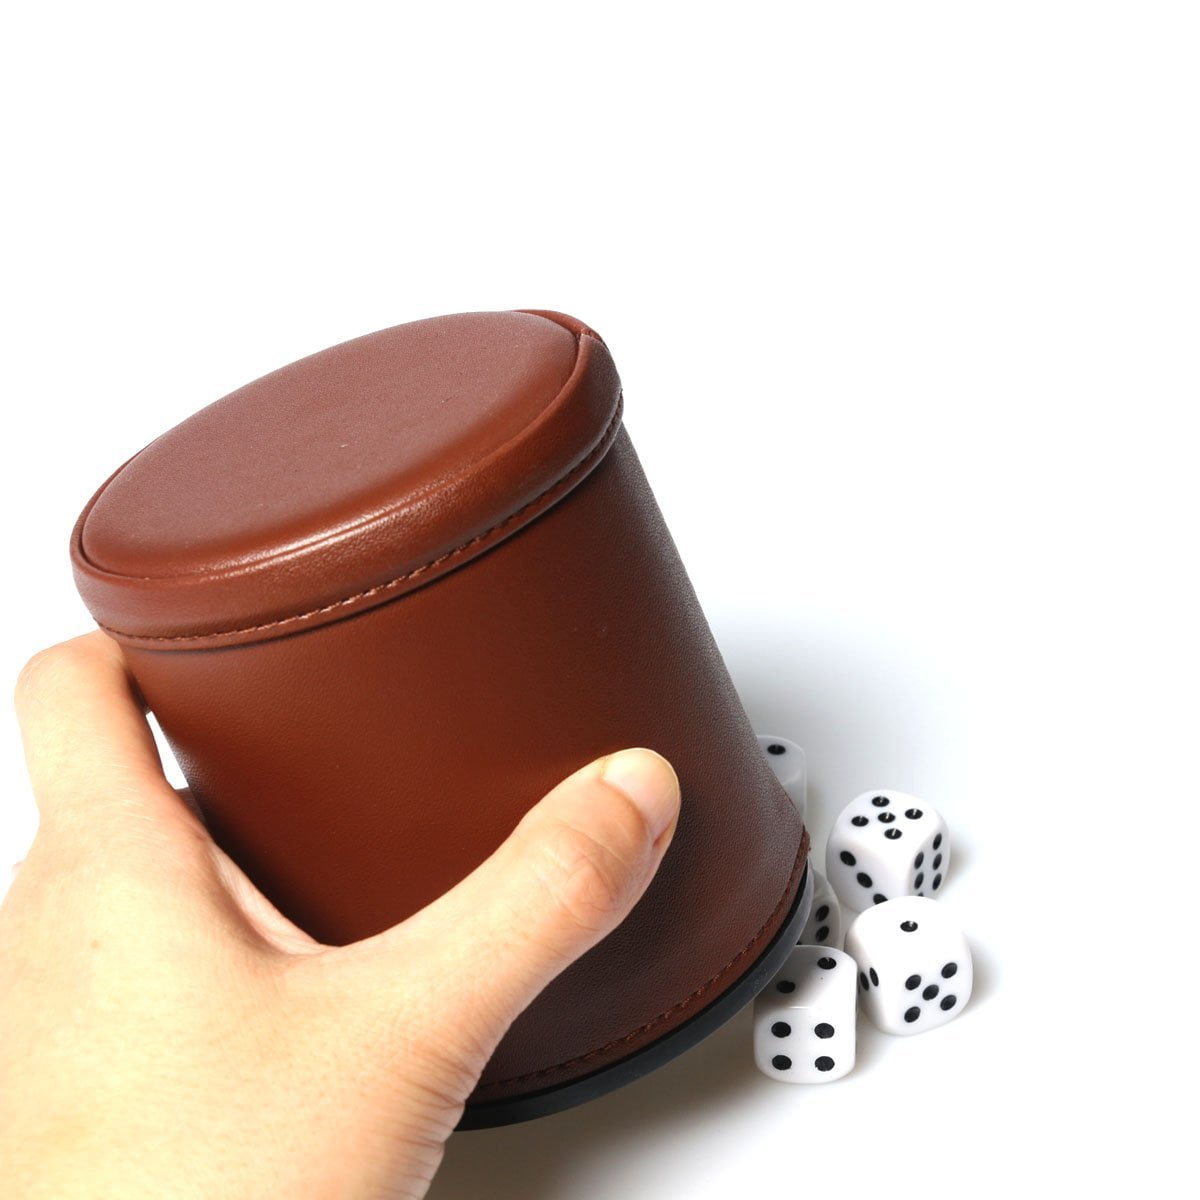 5 Pack PU Leather Dice Cup Set with 6 Dot Dices Felt Lined Quiet Shaker Red